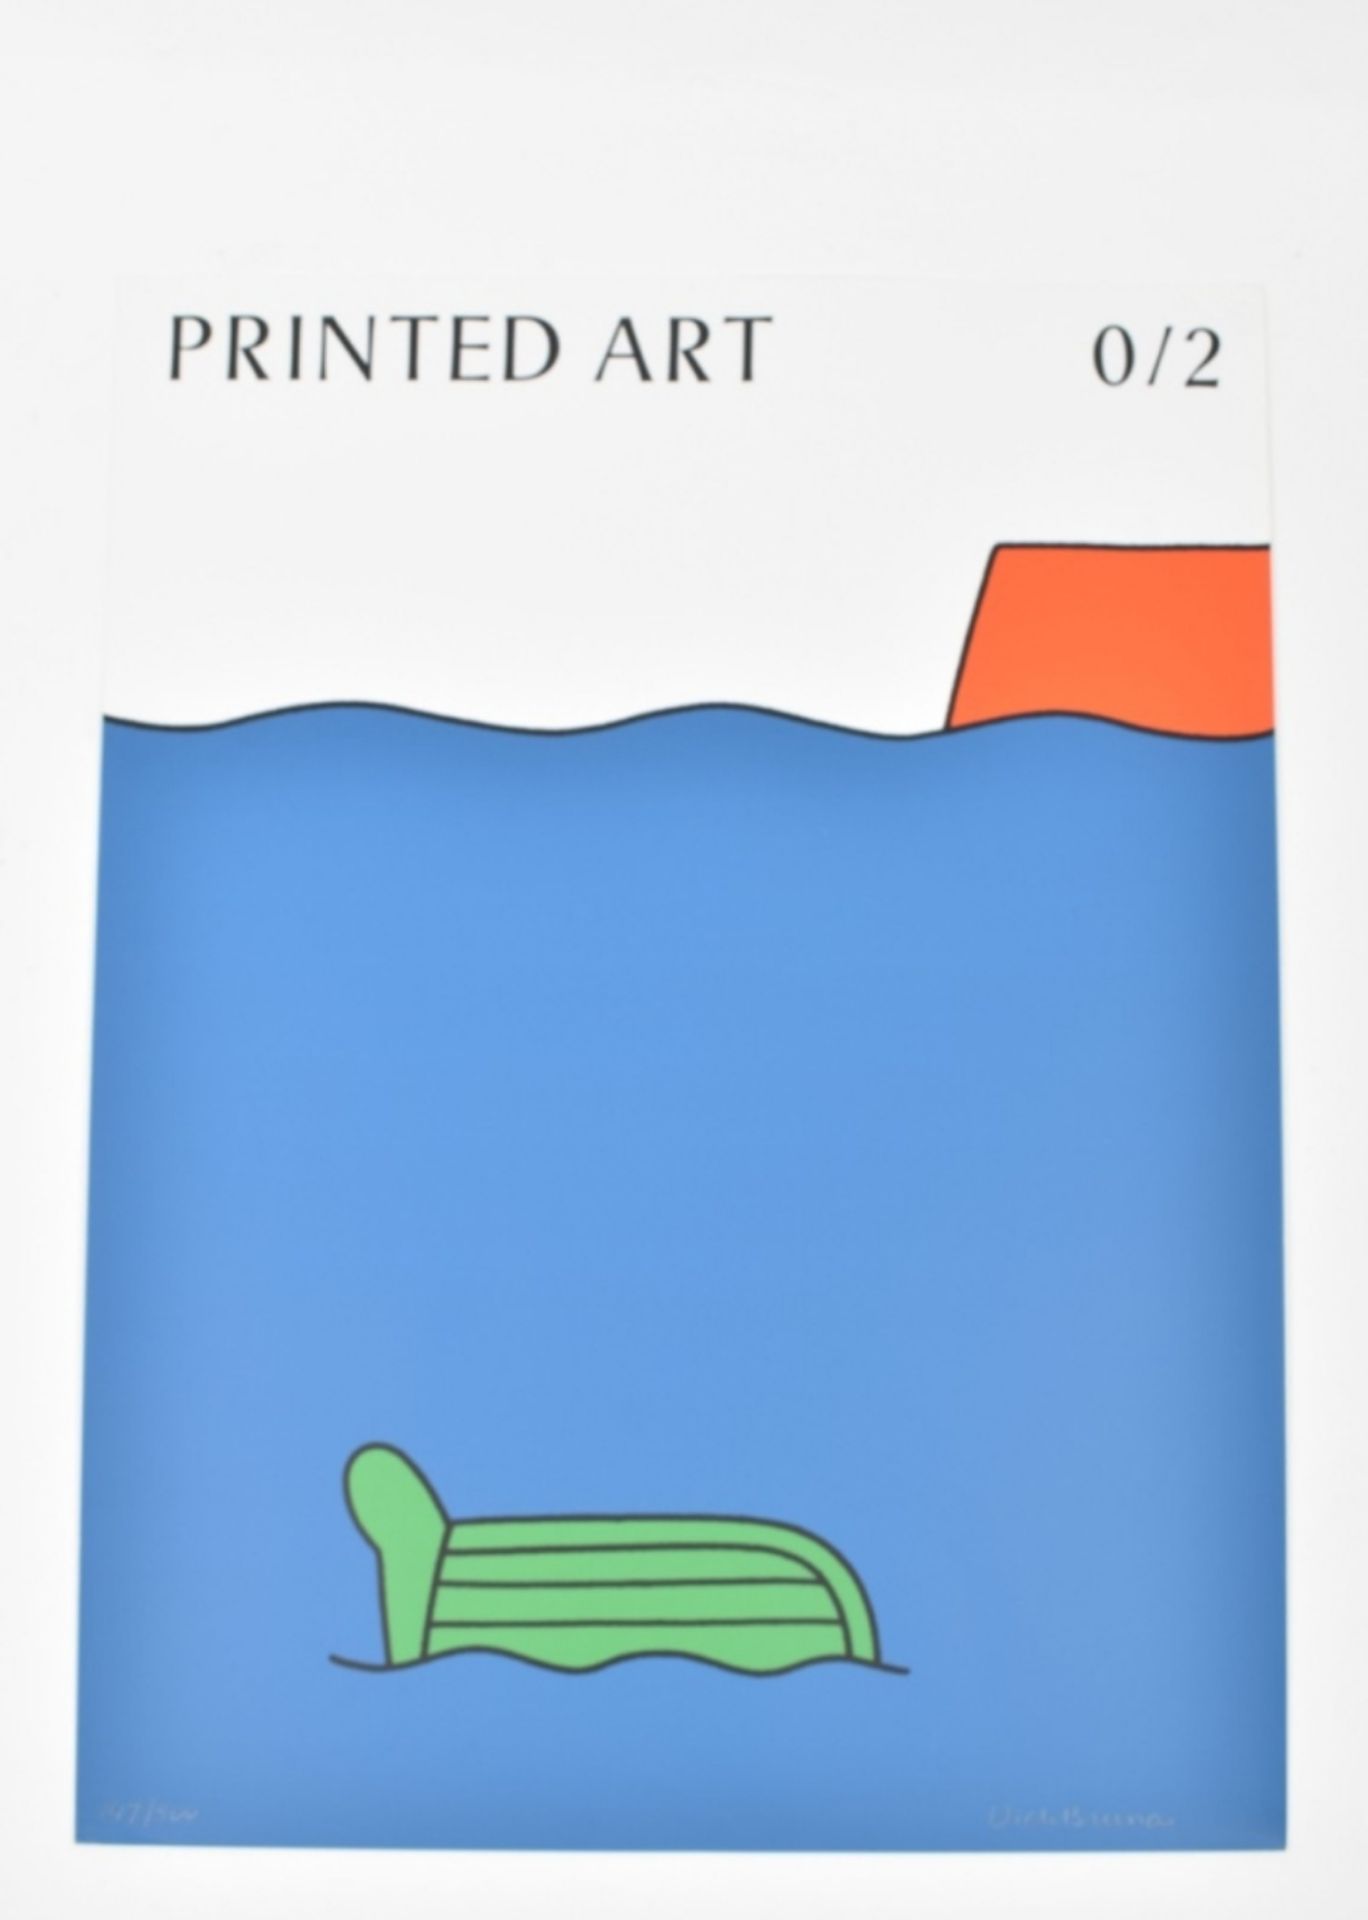 Printed Art. The most limited quarterly